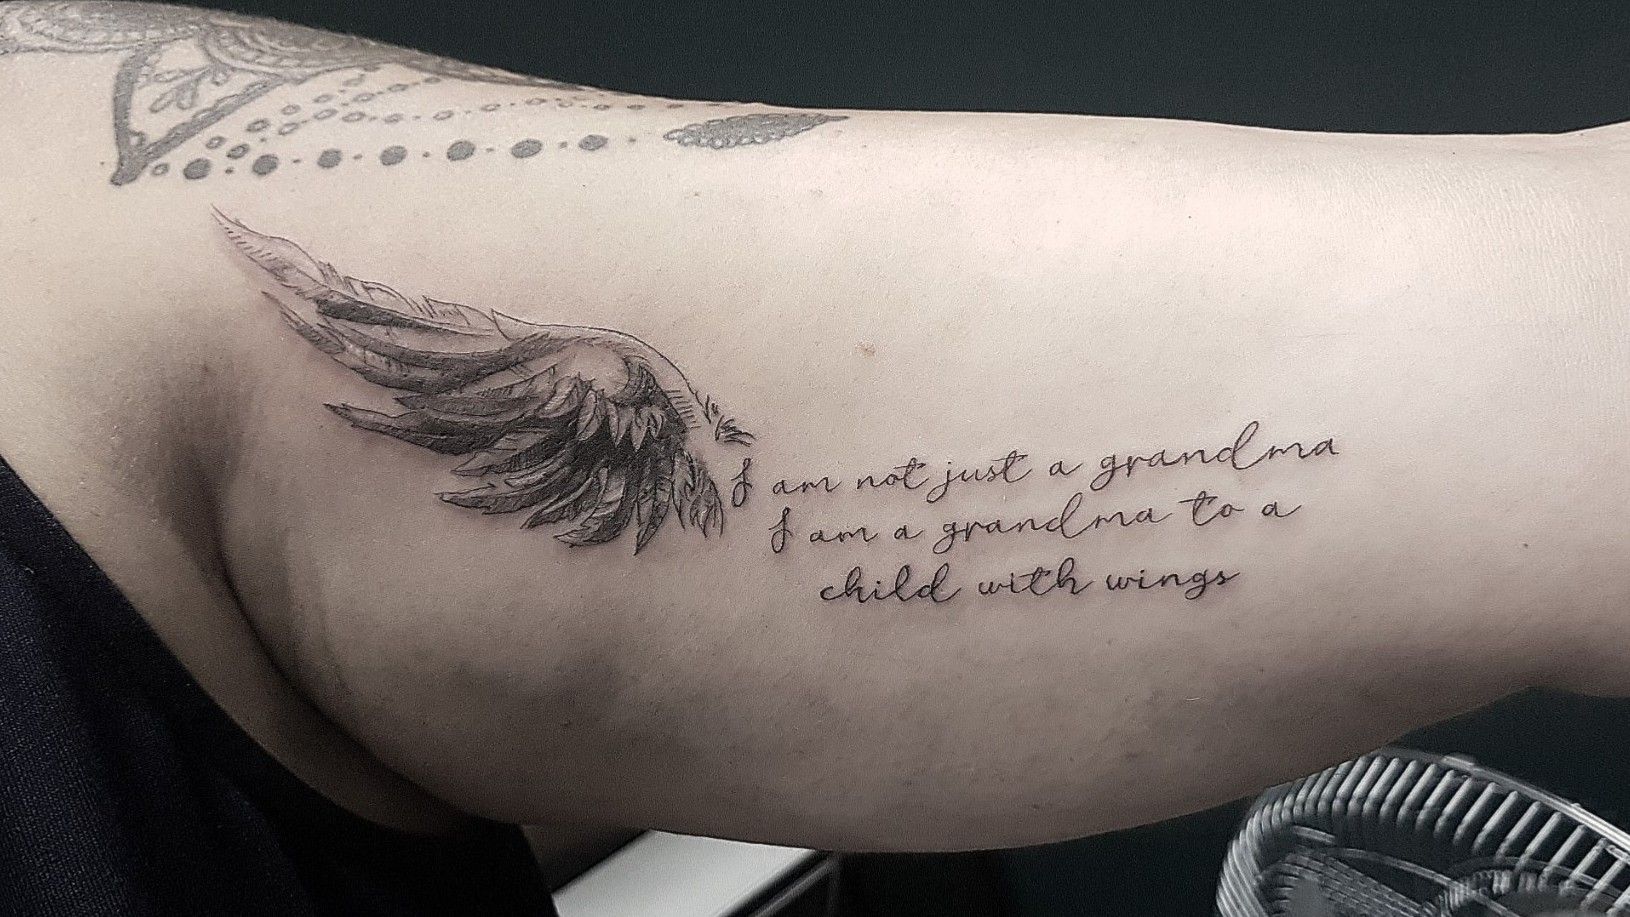 Your wings were ready but my heart was not  Meaningful tattoo quotes  Tattoos Feather tattoos